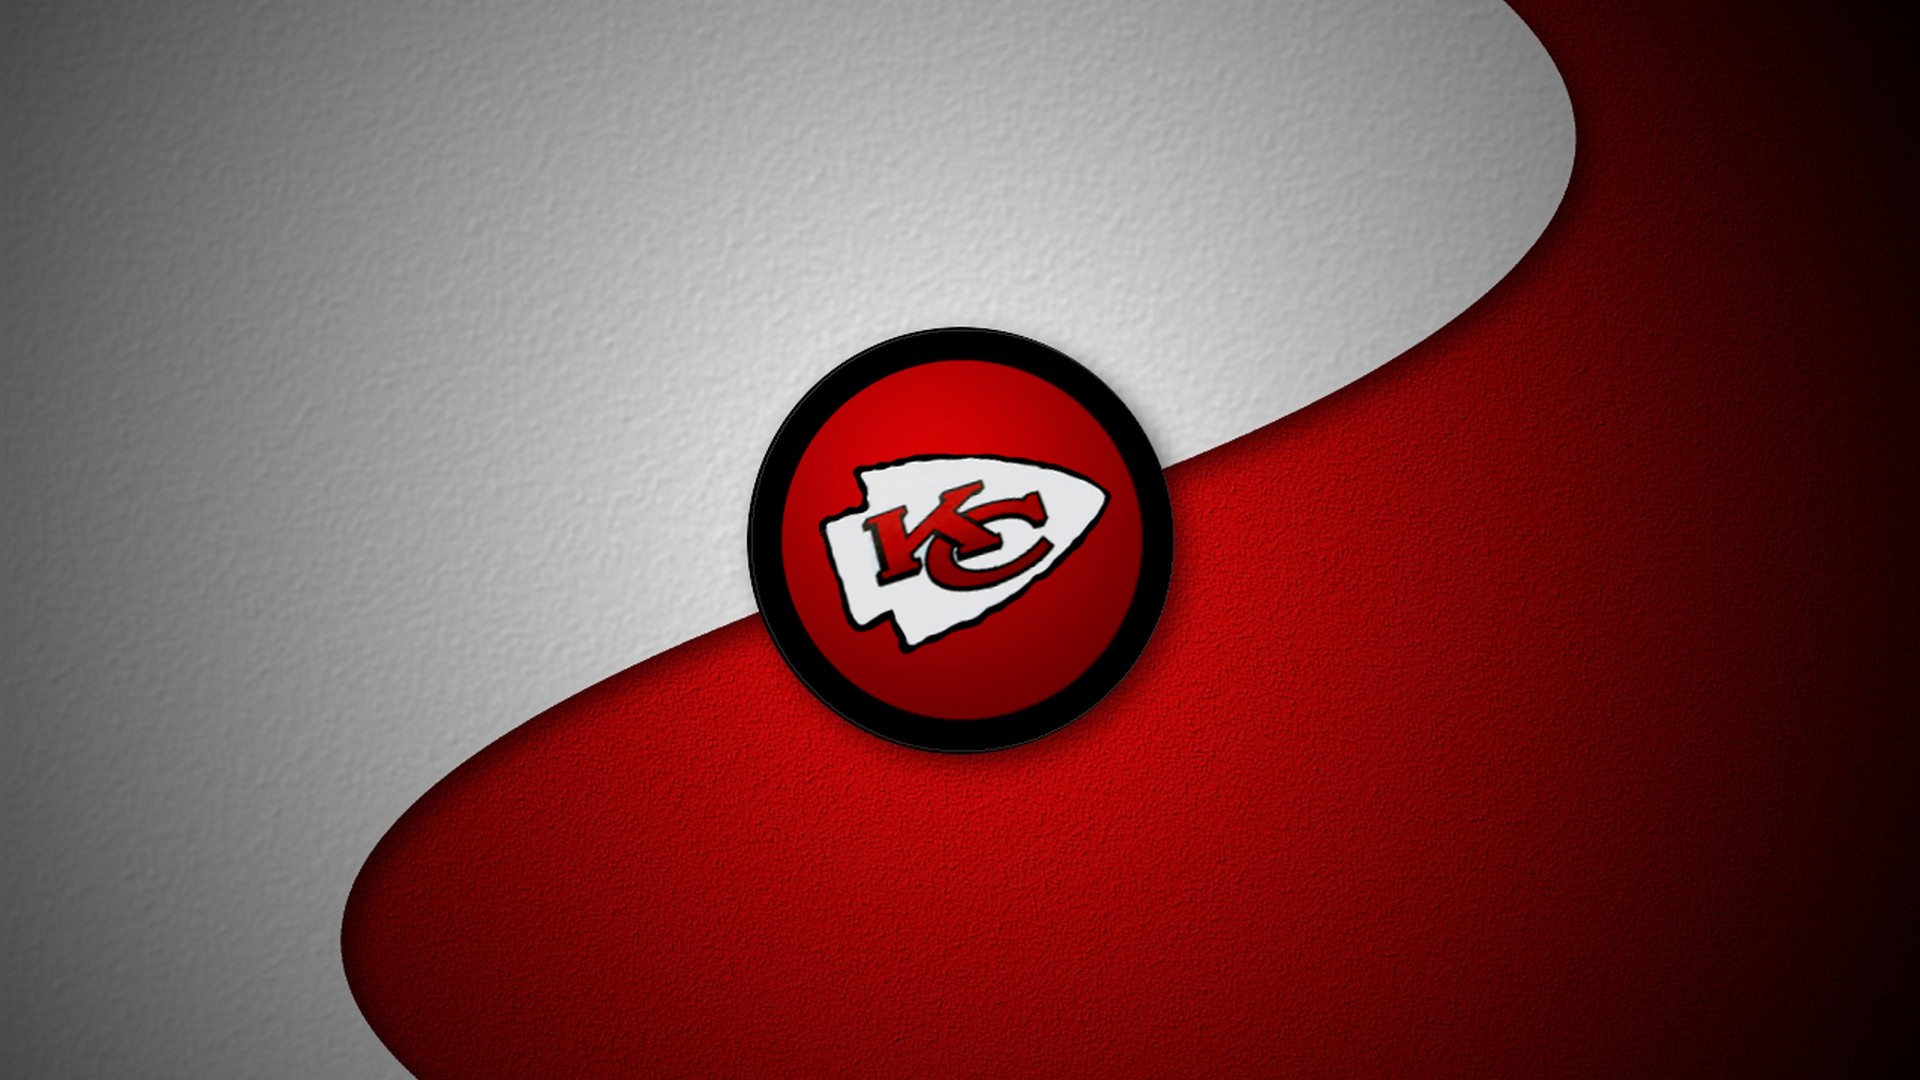 Kansas City Chiefs Desktop Wallpapers with resolution 1920x1080 pixel. You can make this wallpaper for your Mac or Windows Desktop Background, iPhone, Android or Tablet and another Smartphone device